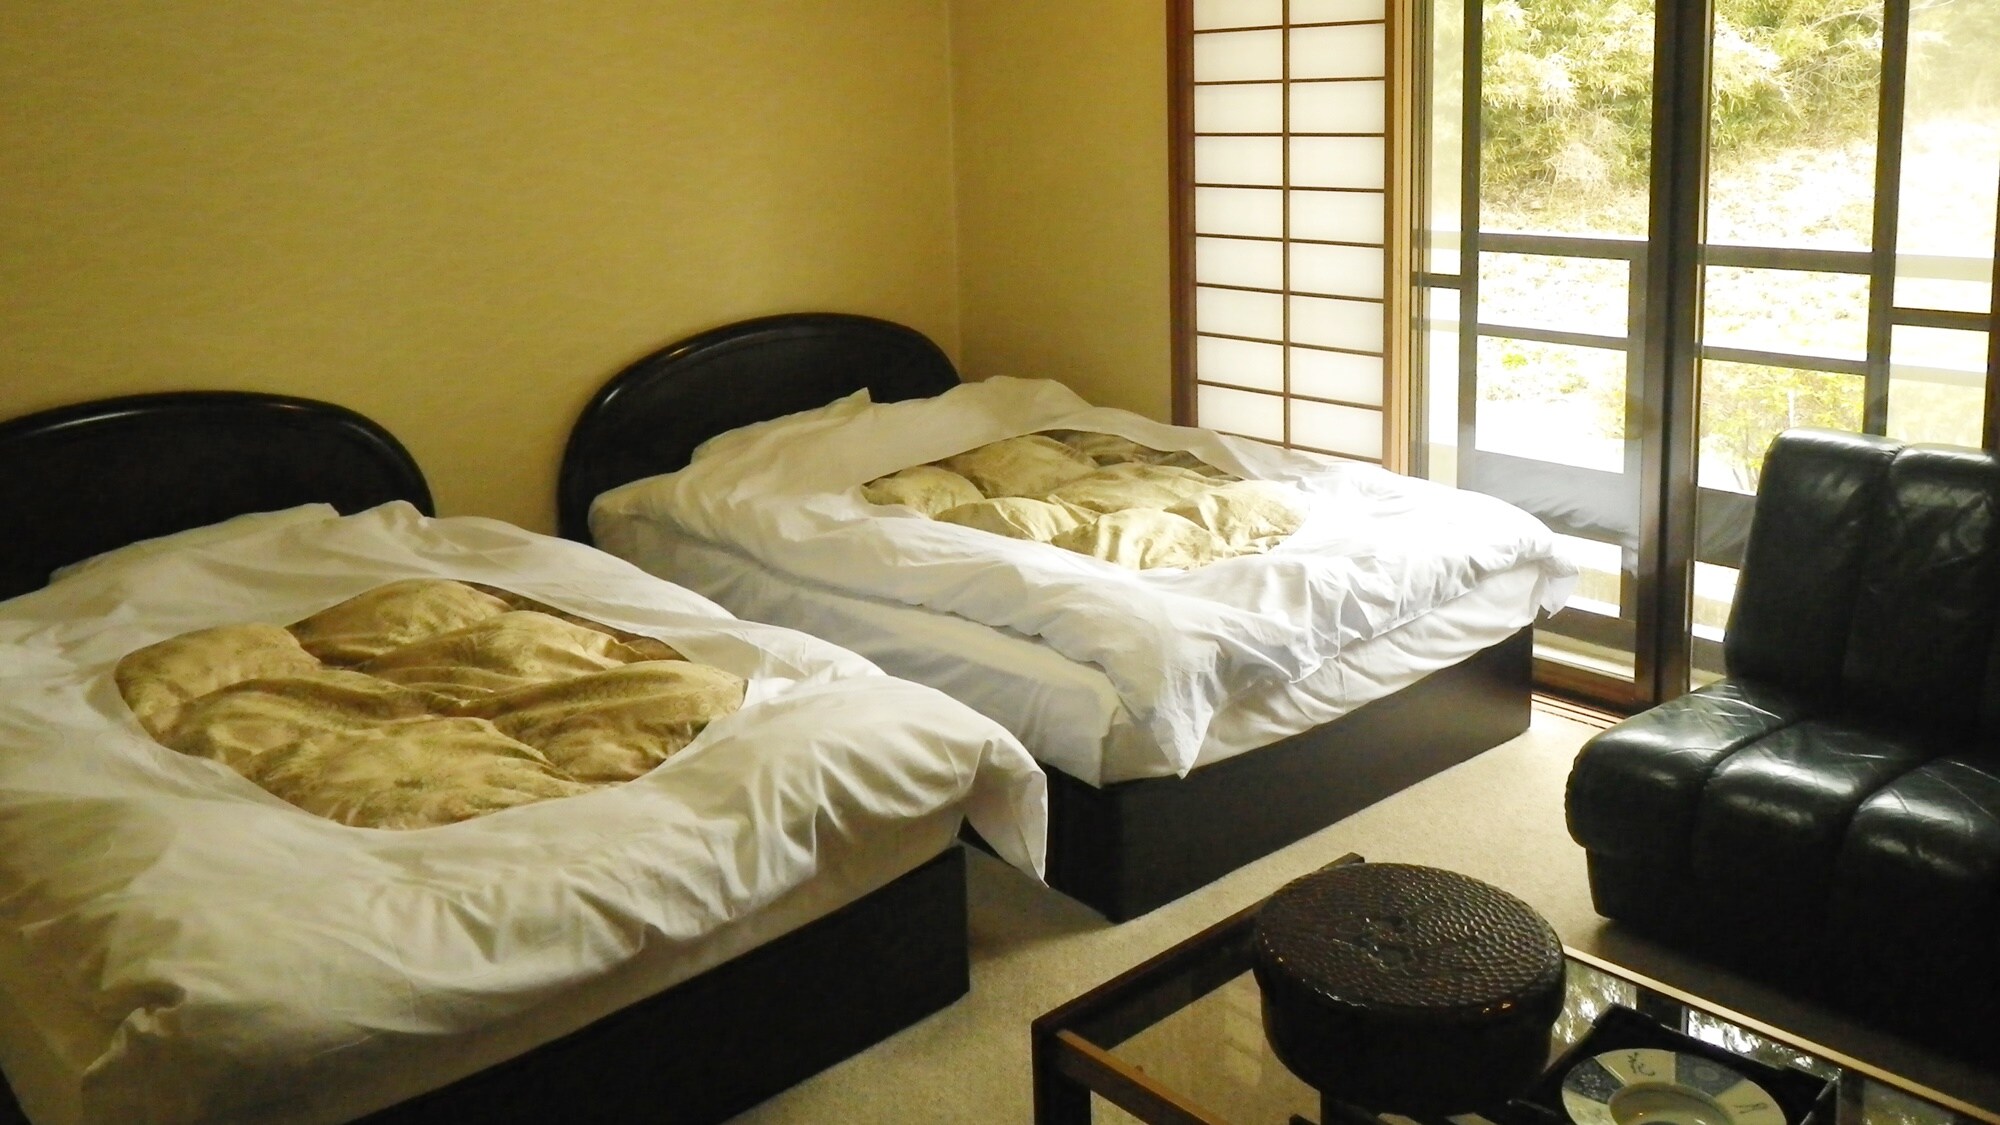 * An example of a Western-style room / You can sleep soundly in bed